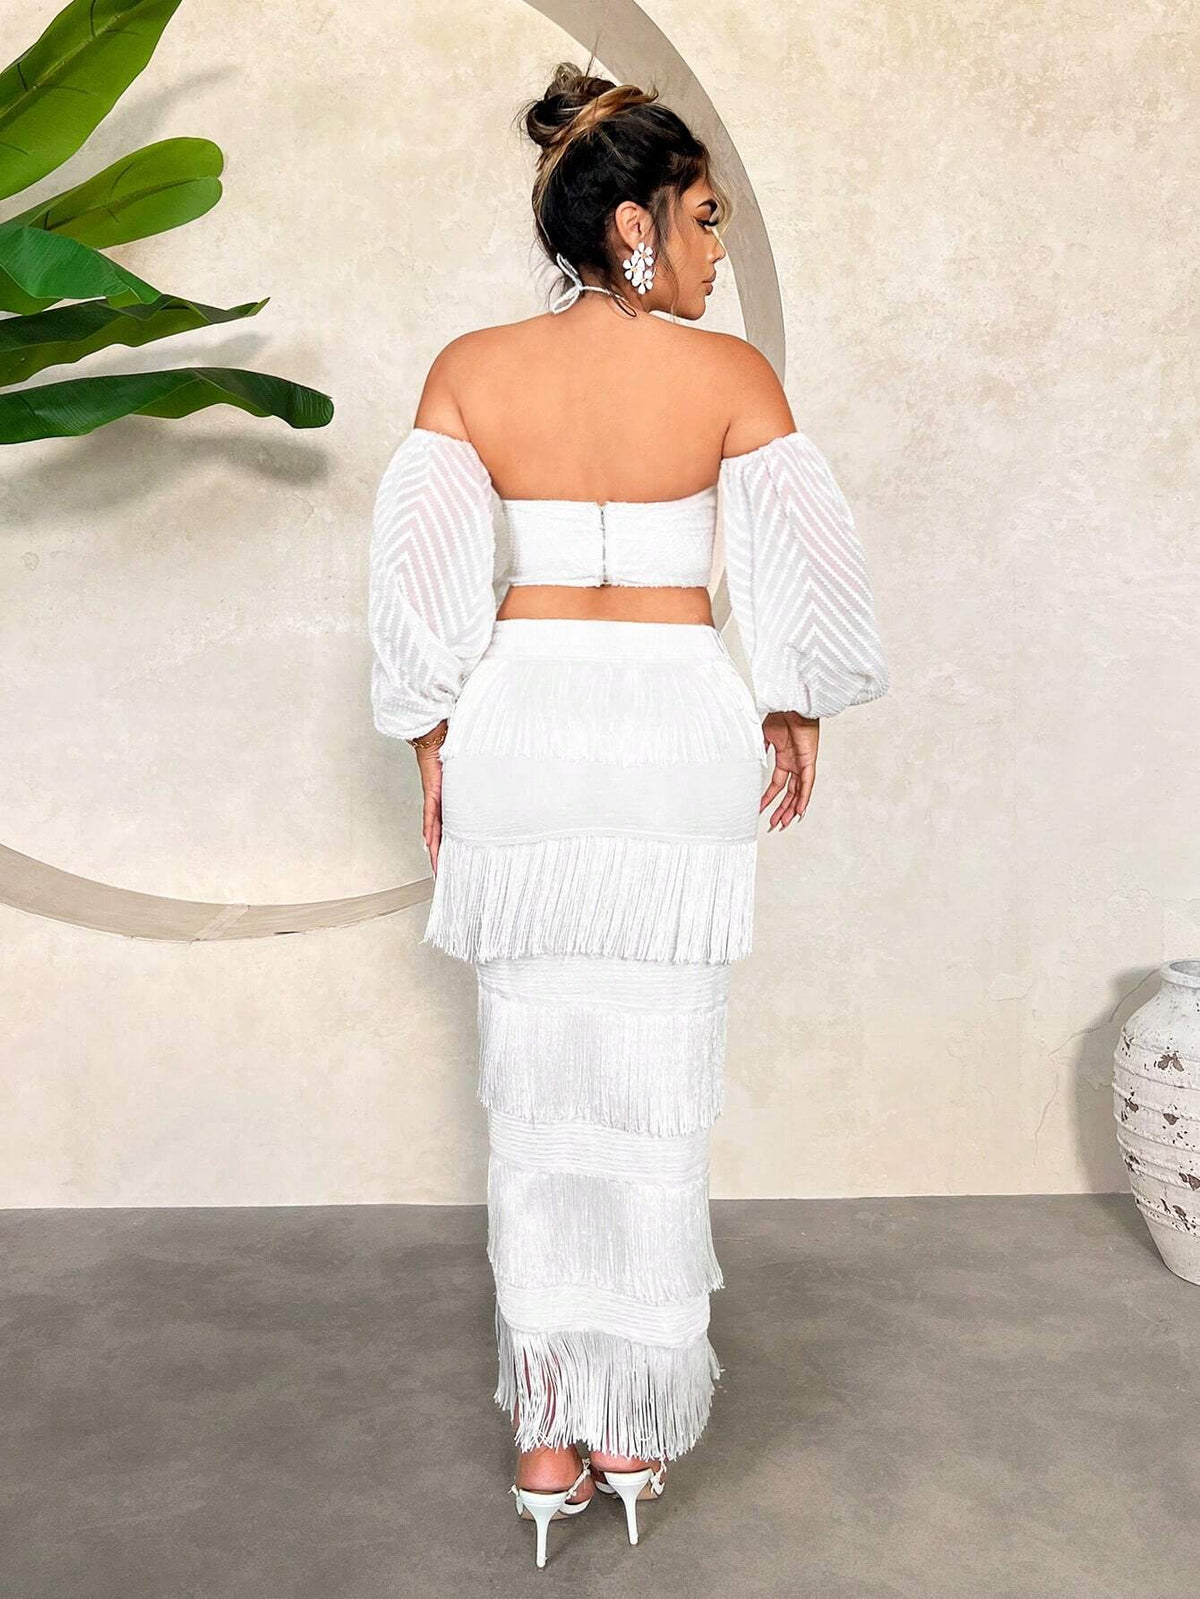 Vacation Cute Resort Beach Wear Abaya Bohemian Holiday Ruched Layered Cake Flounce Hem Summer Sexy Fringe See-Through Chiffon Crop Top And Long White Skirt Stretchy Fringe Skirt Set For Women Two Piece Outfits